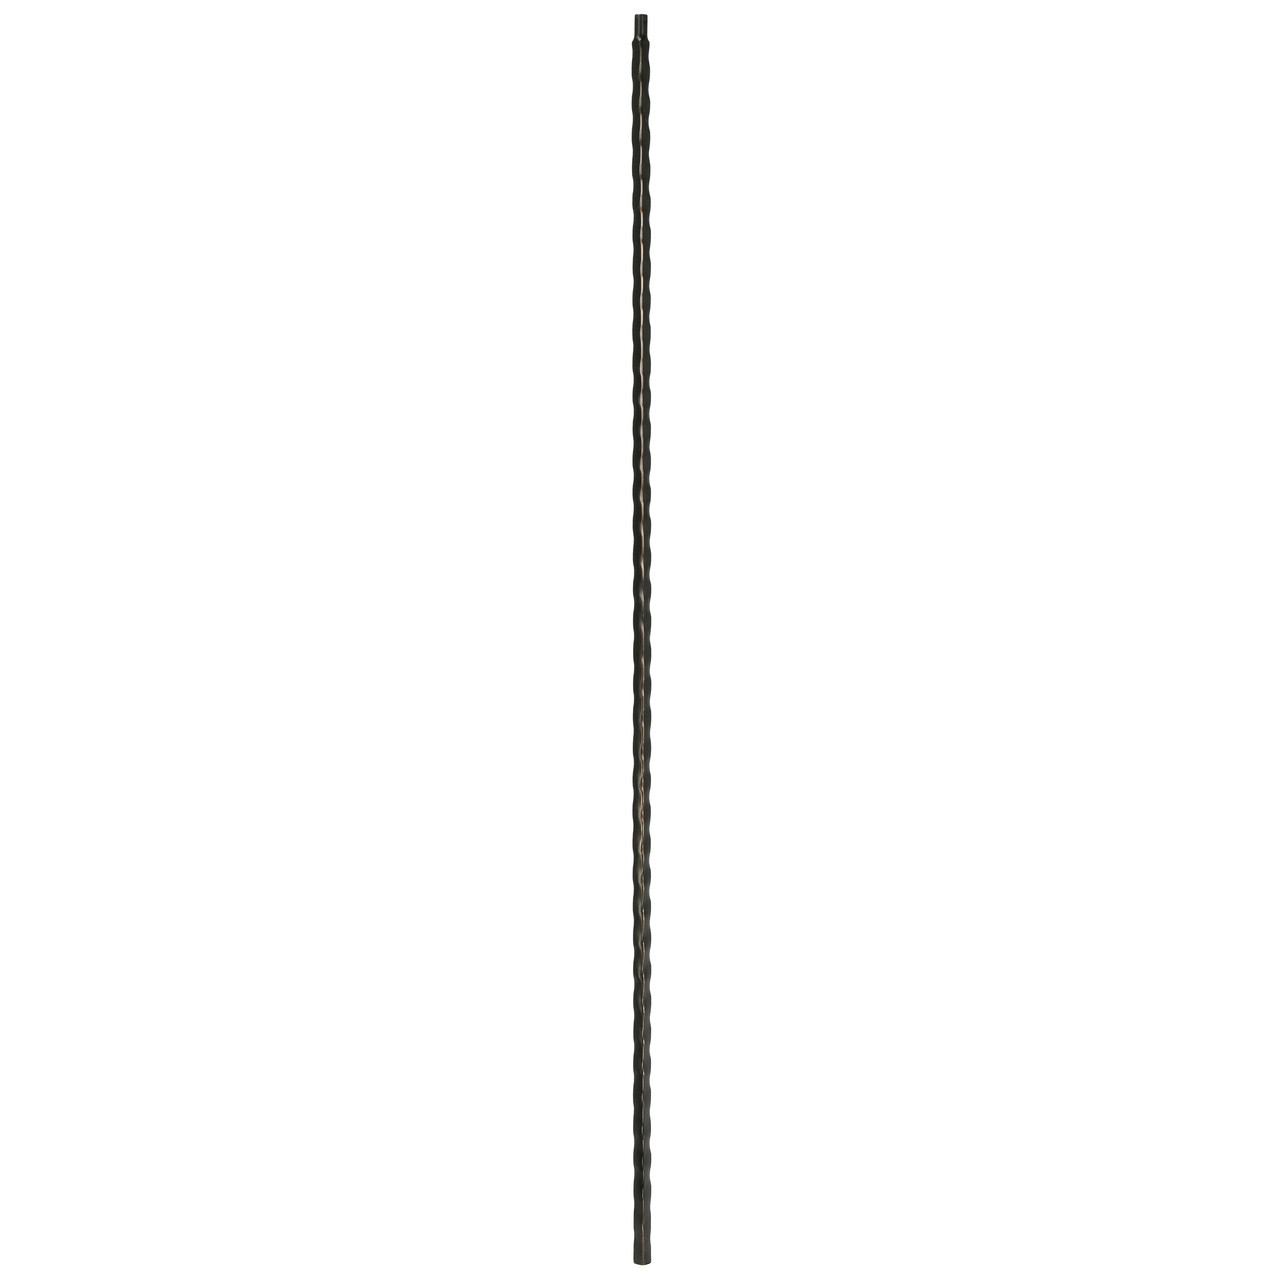 T-30 Edge Hammered Plain Bar Tubular Steel Baluster Show in Rubbed Copper